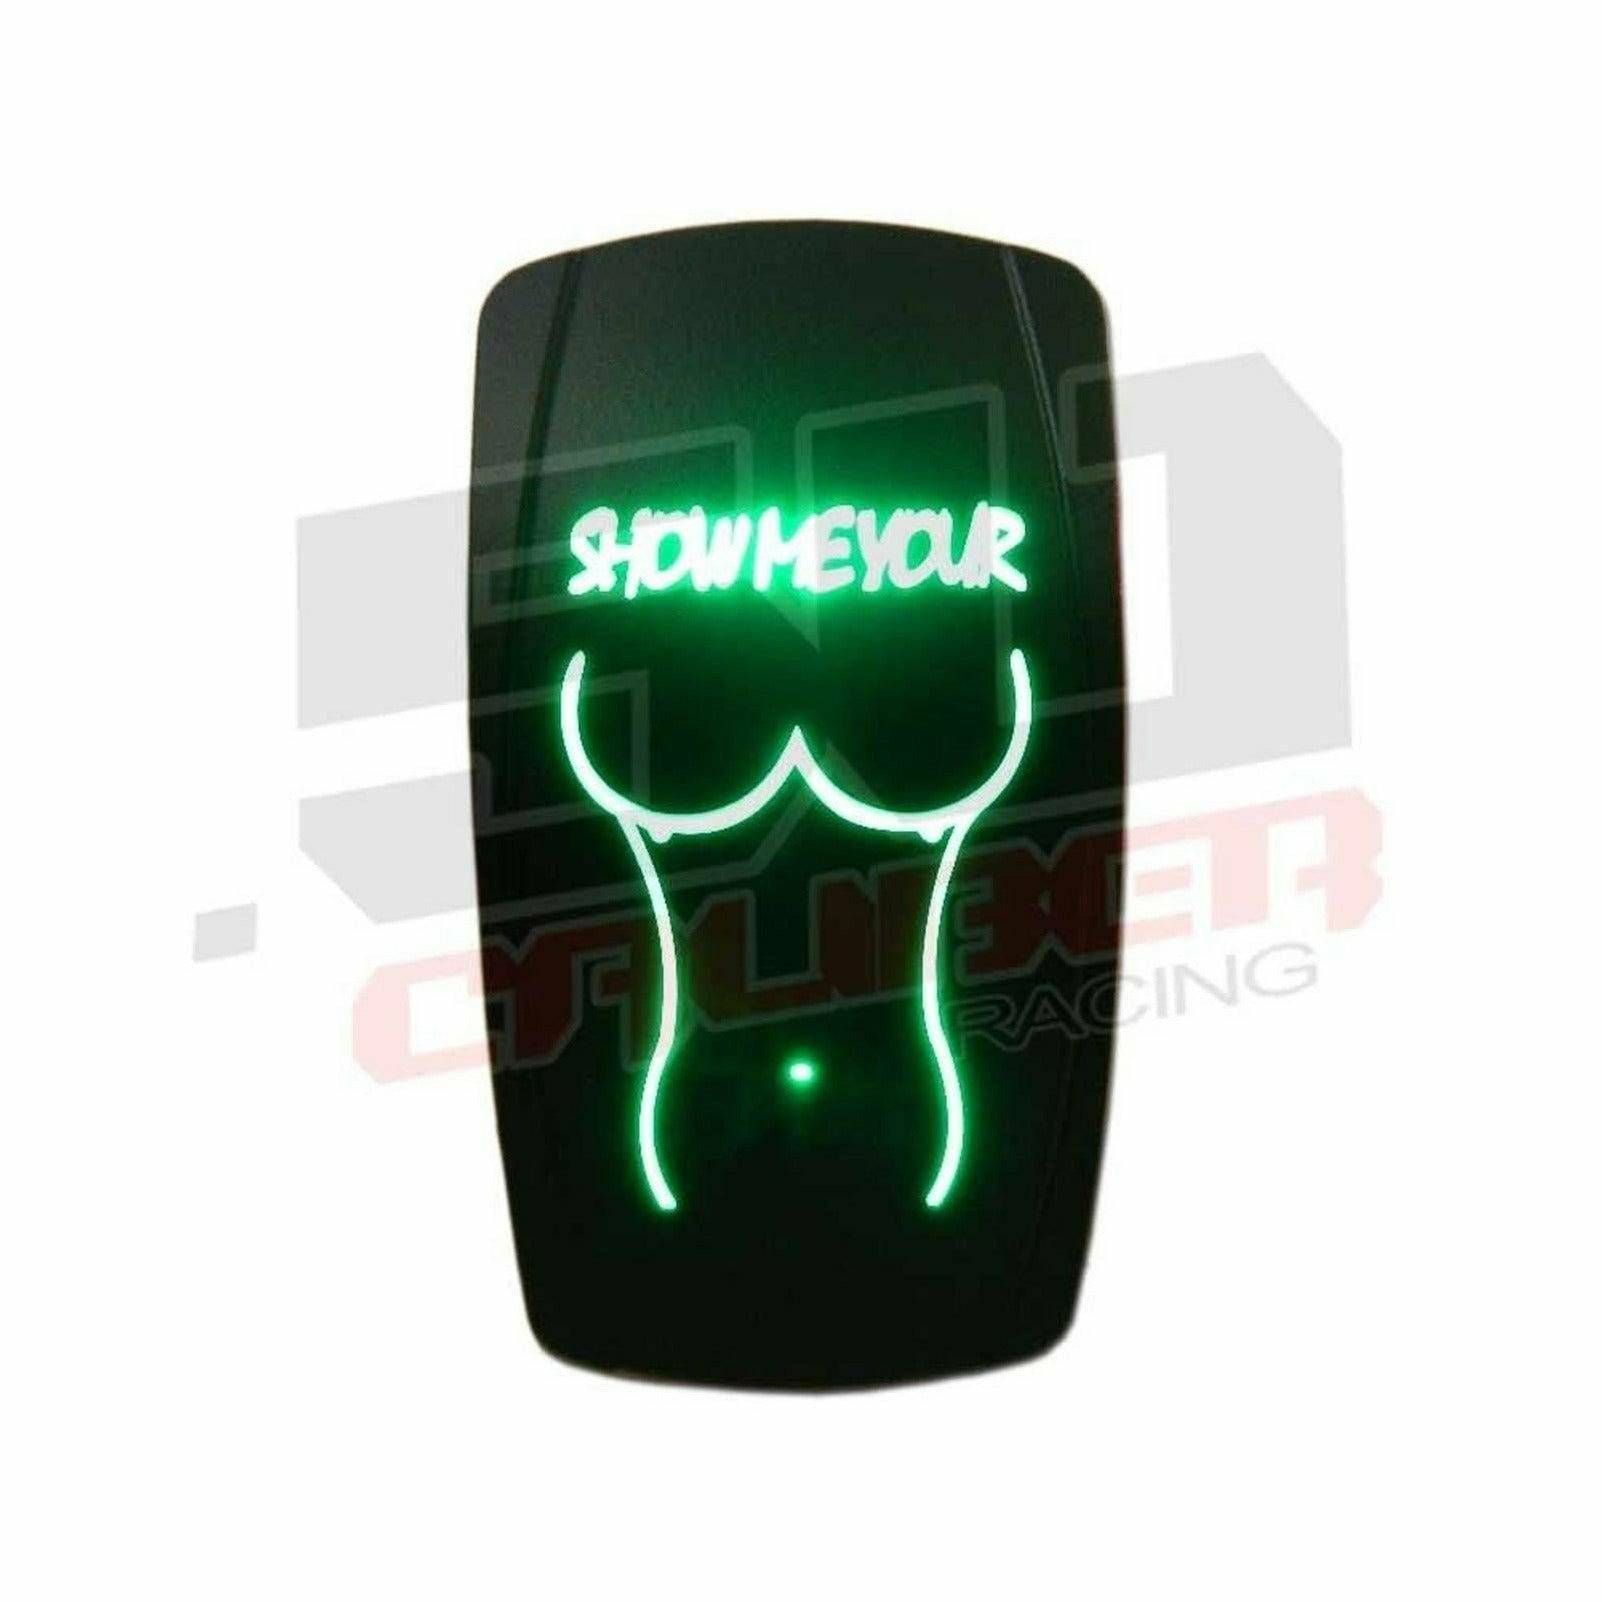 50 Caliber Racing "Show Me Your" Waterproof On/Off Rocker Switch